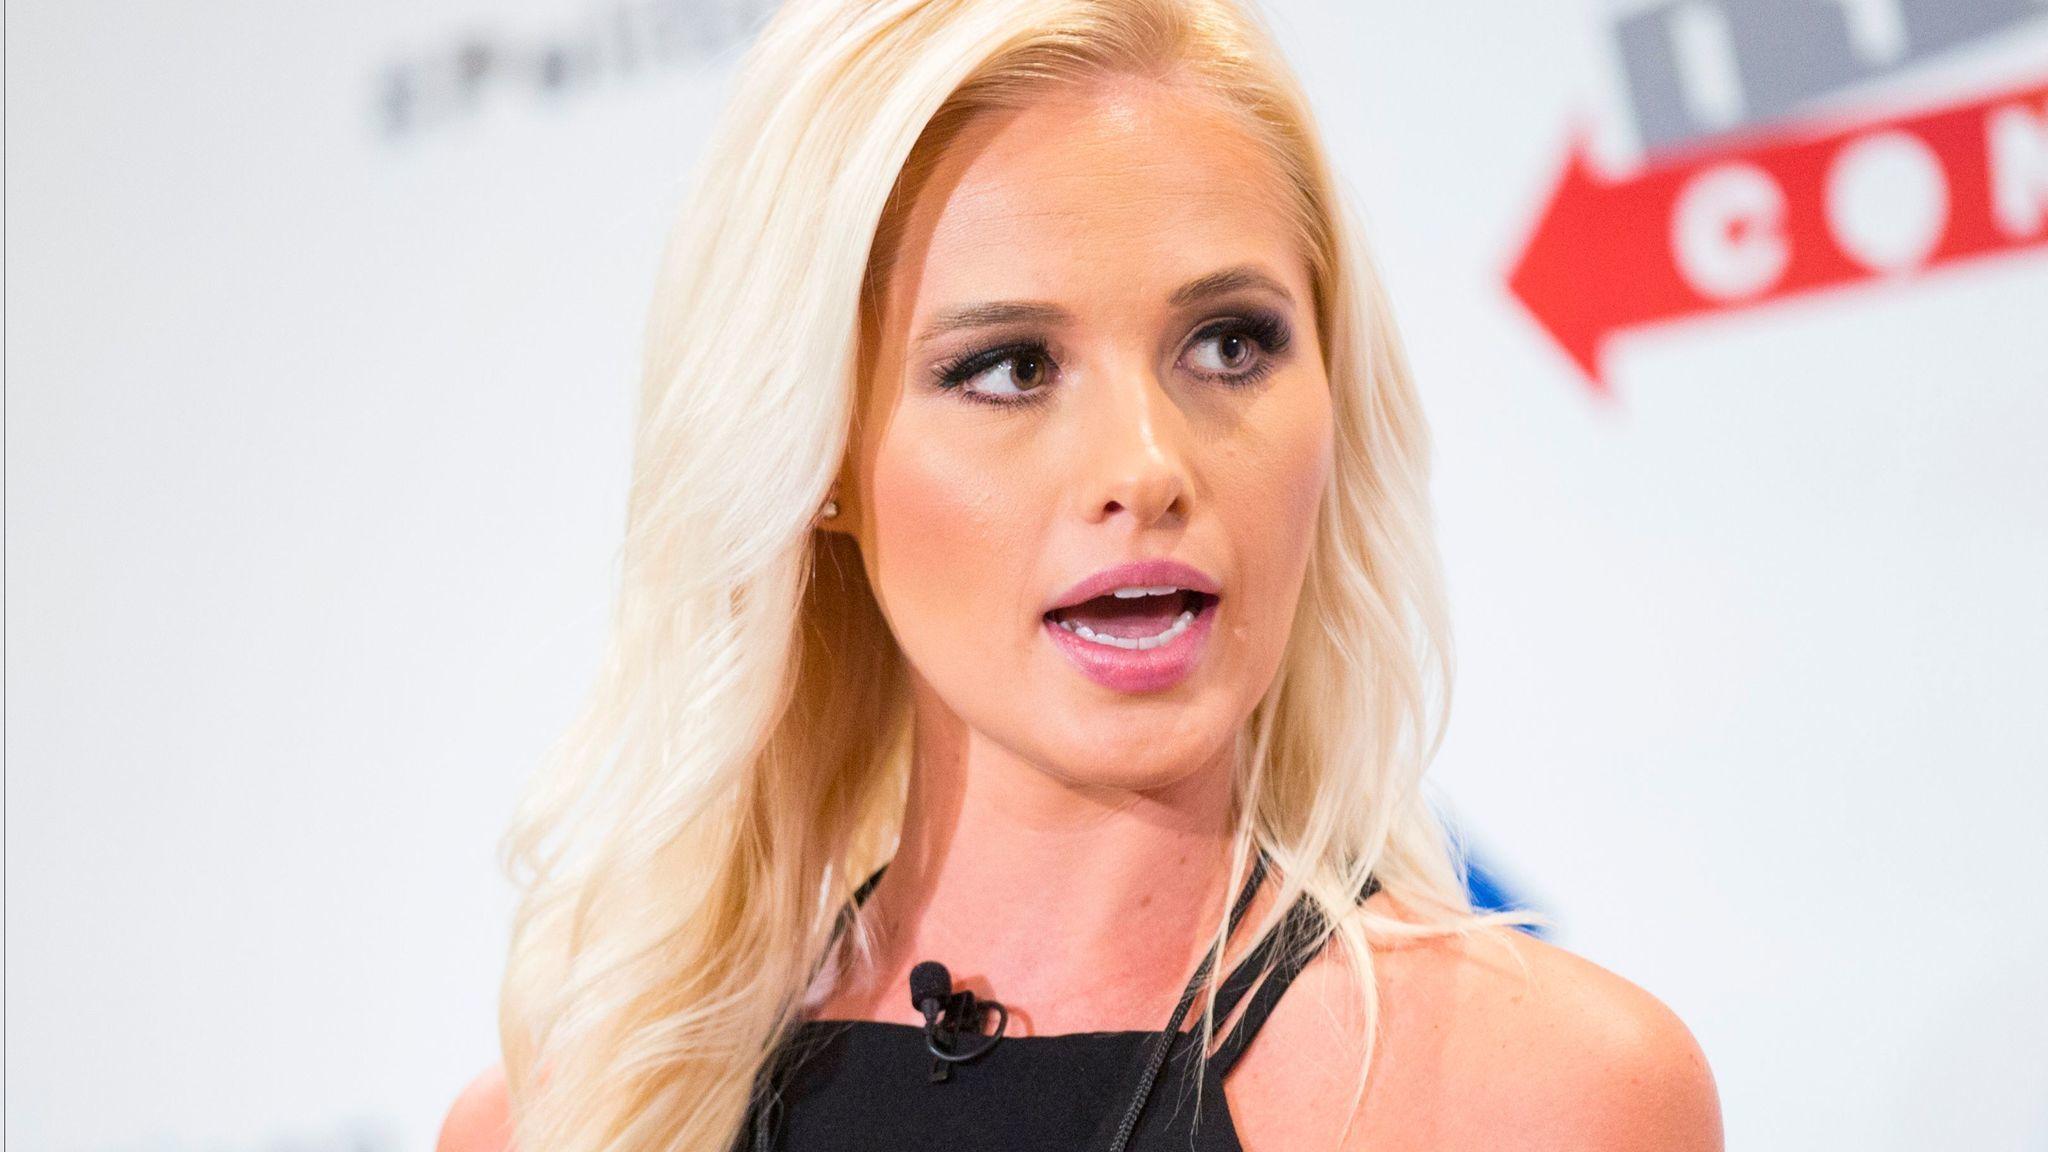 WATCH: Tomi Lahren Responds To 'The View' Digging Up Her Family.